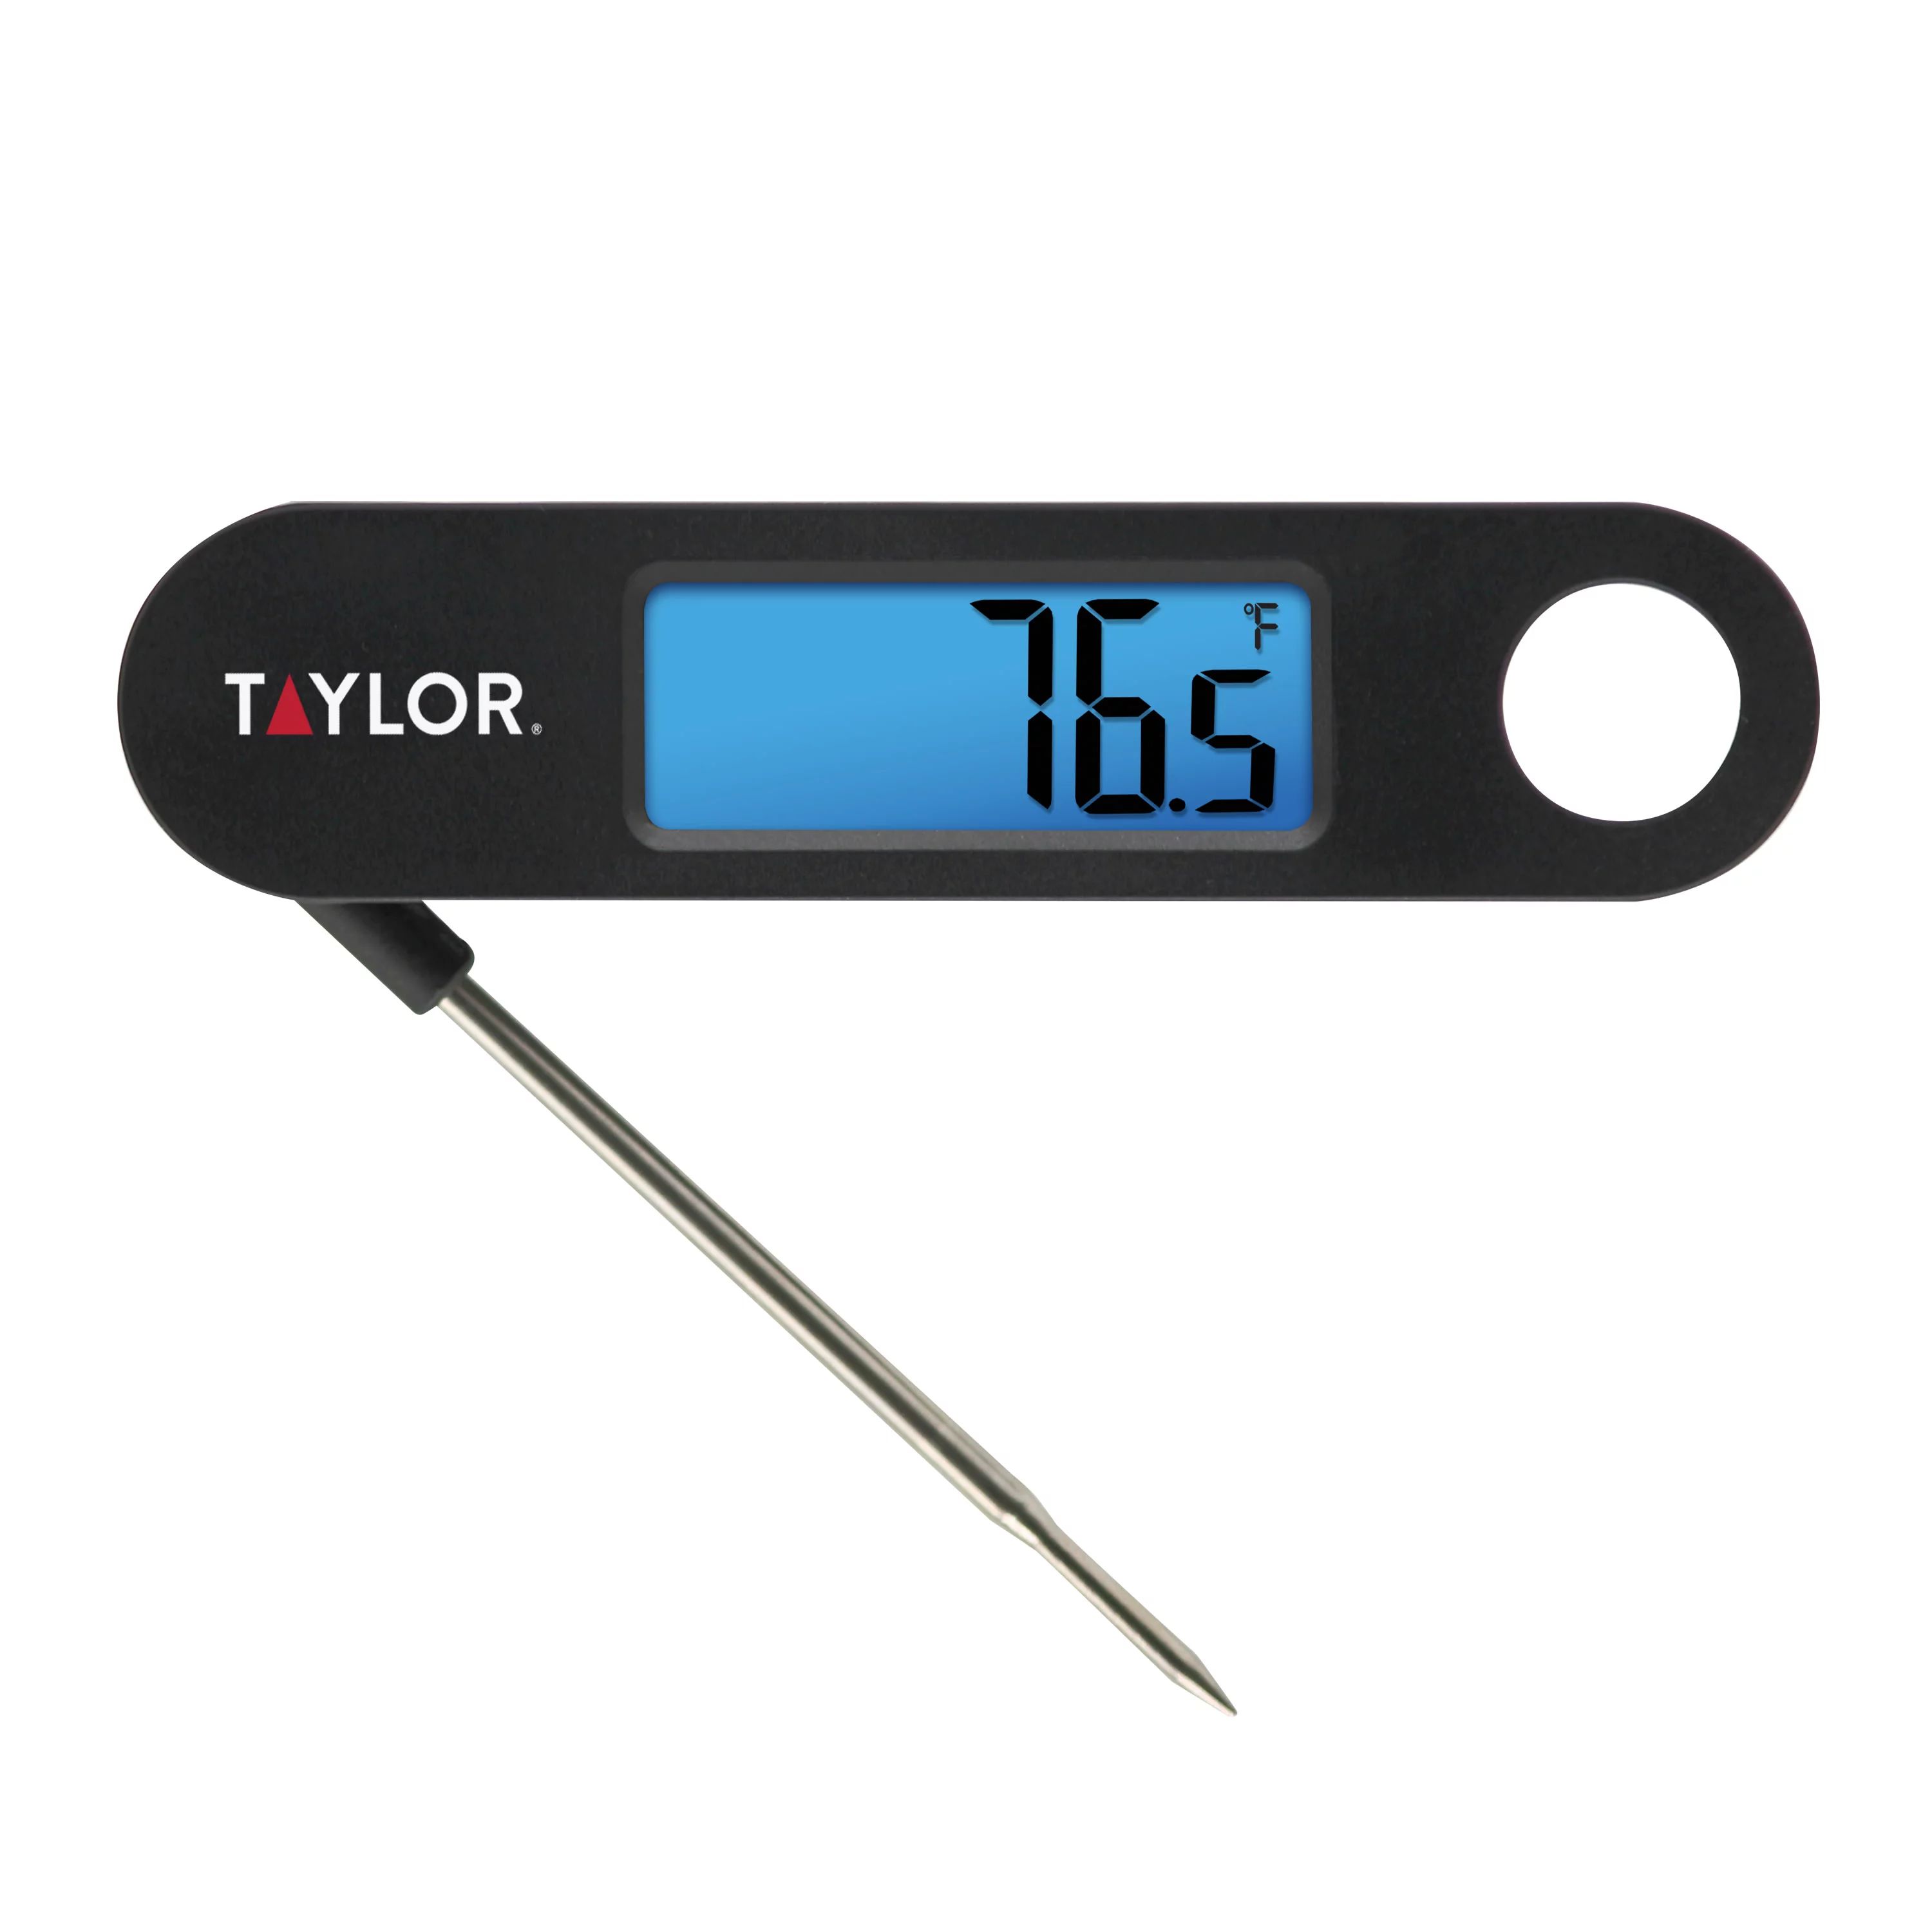 Taylor Digital Folding Probe Meat Thermometer with Blue Backlight Display | Walmart (US)